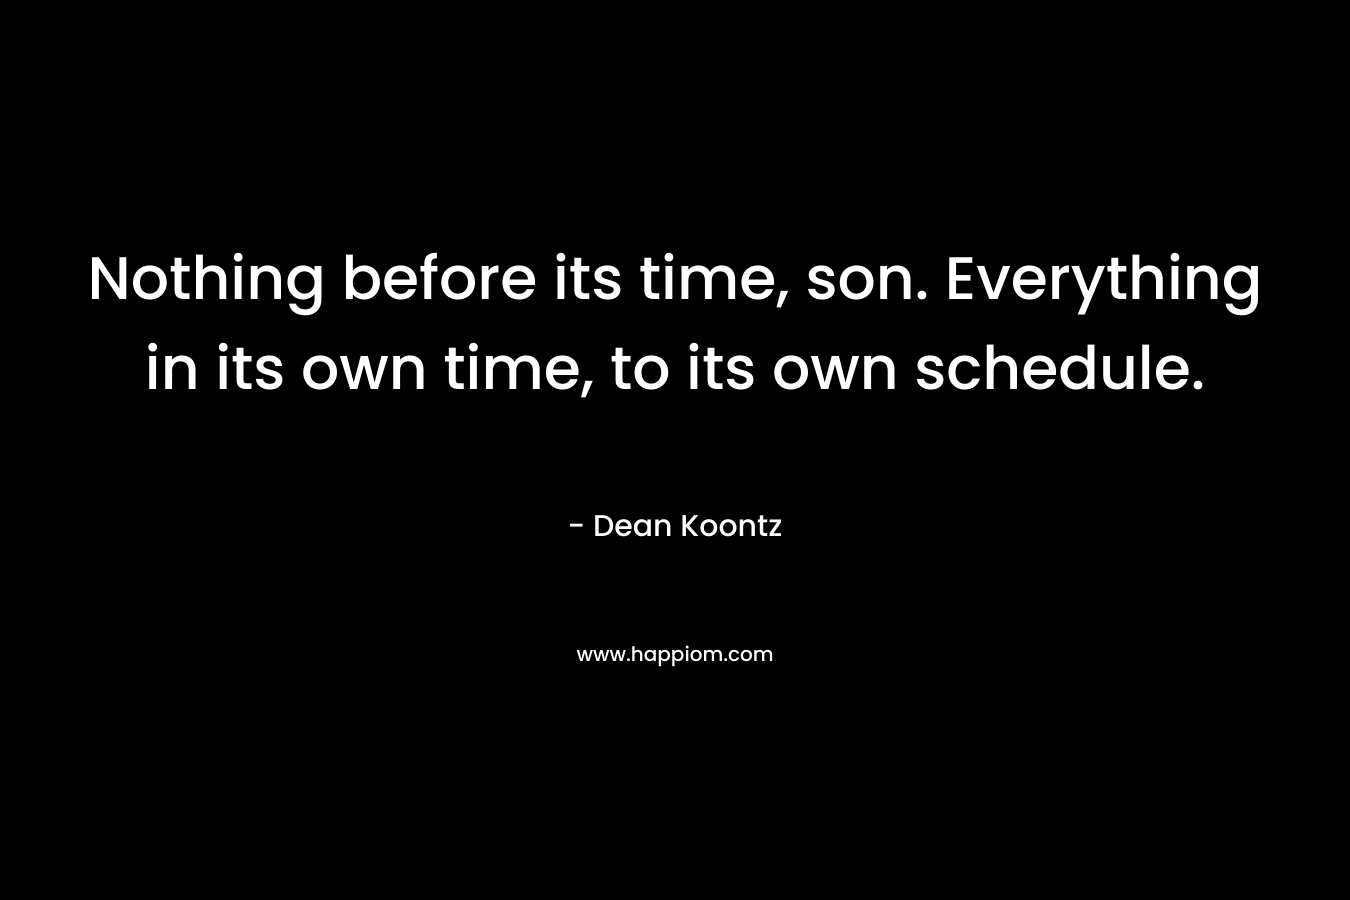 Nothing before its time, son. Everything in its own time, to its own schedule.